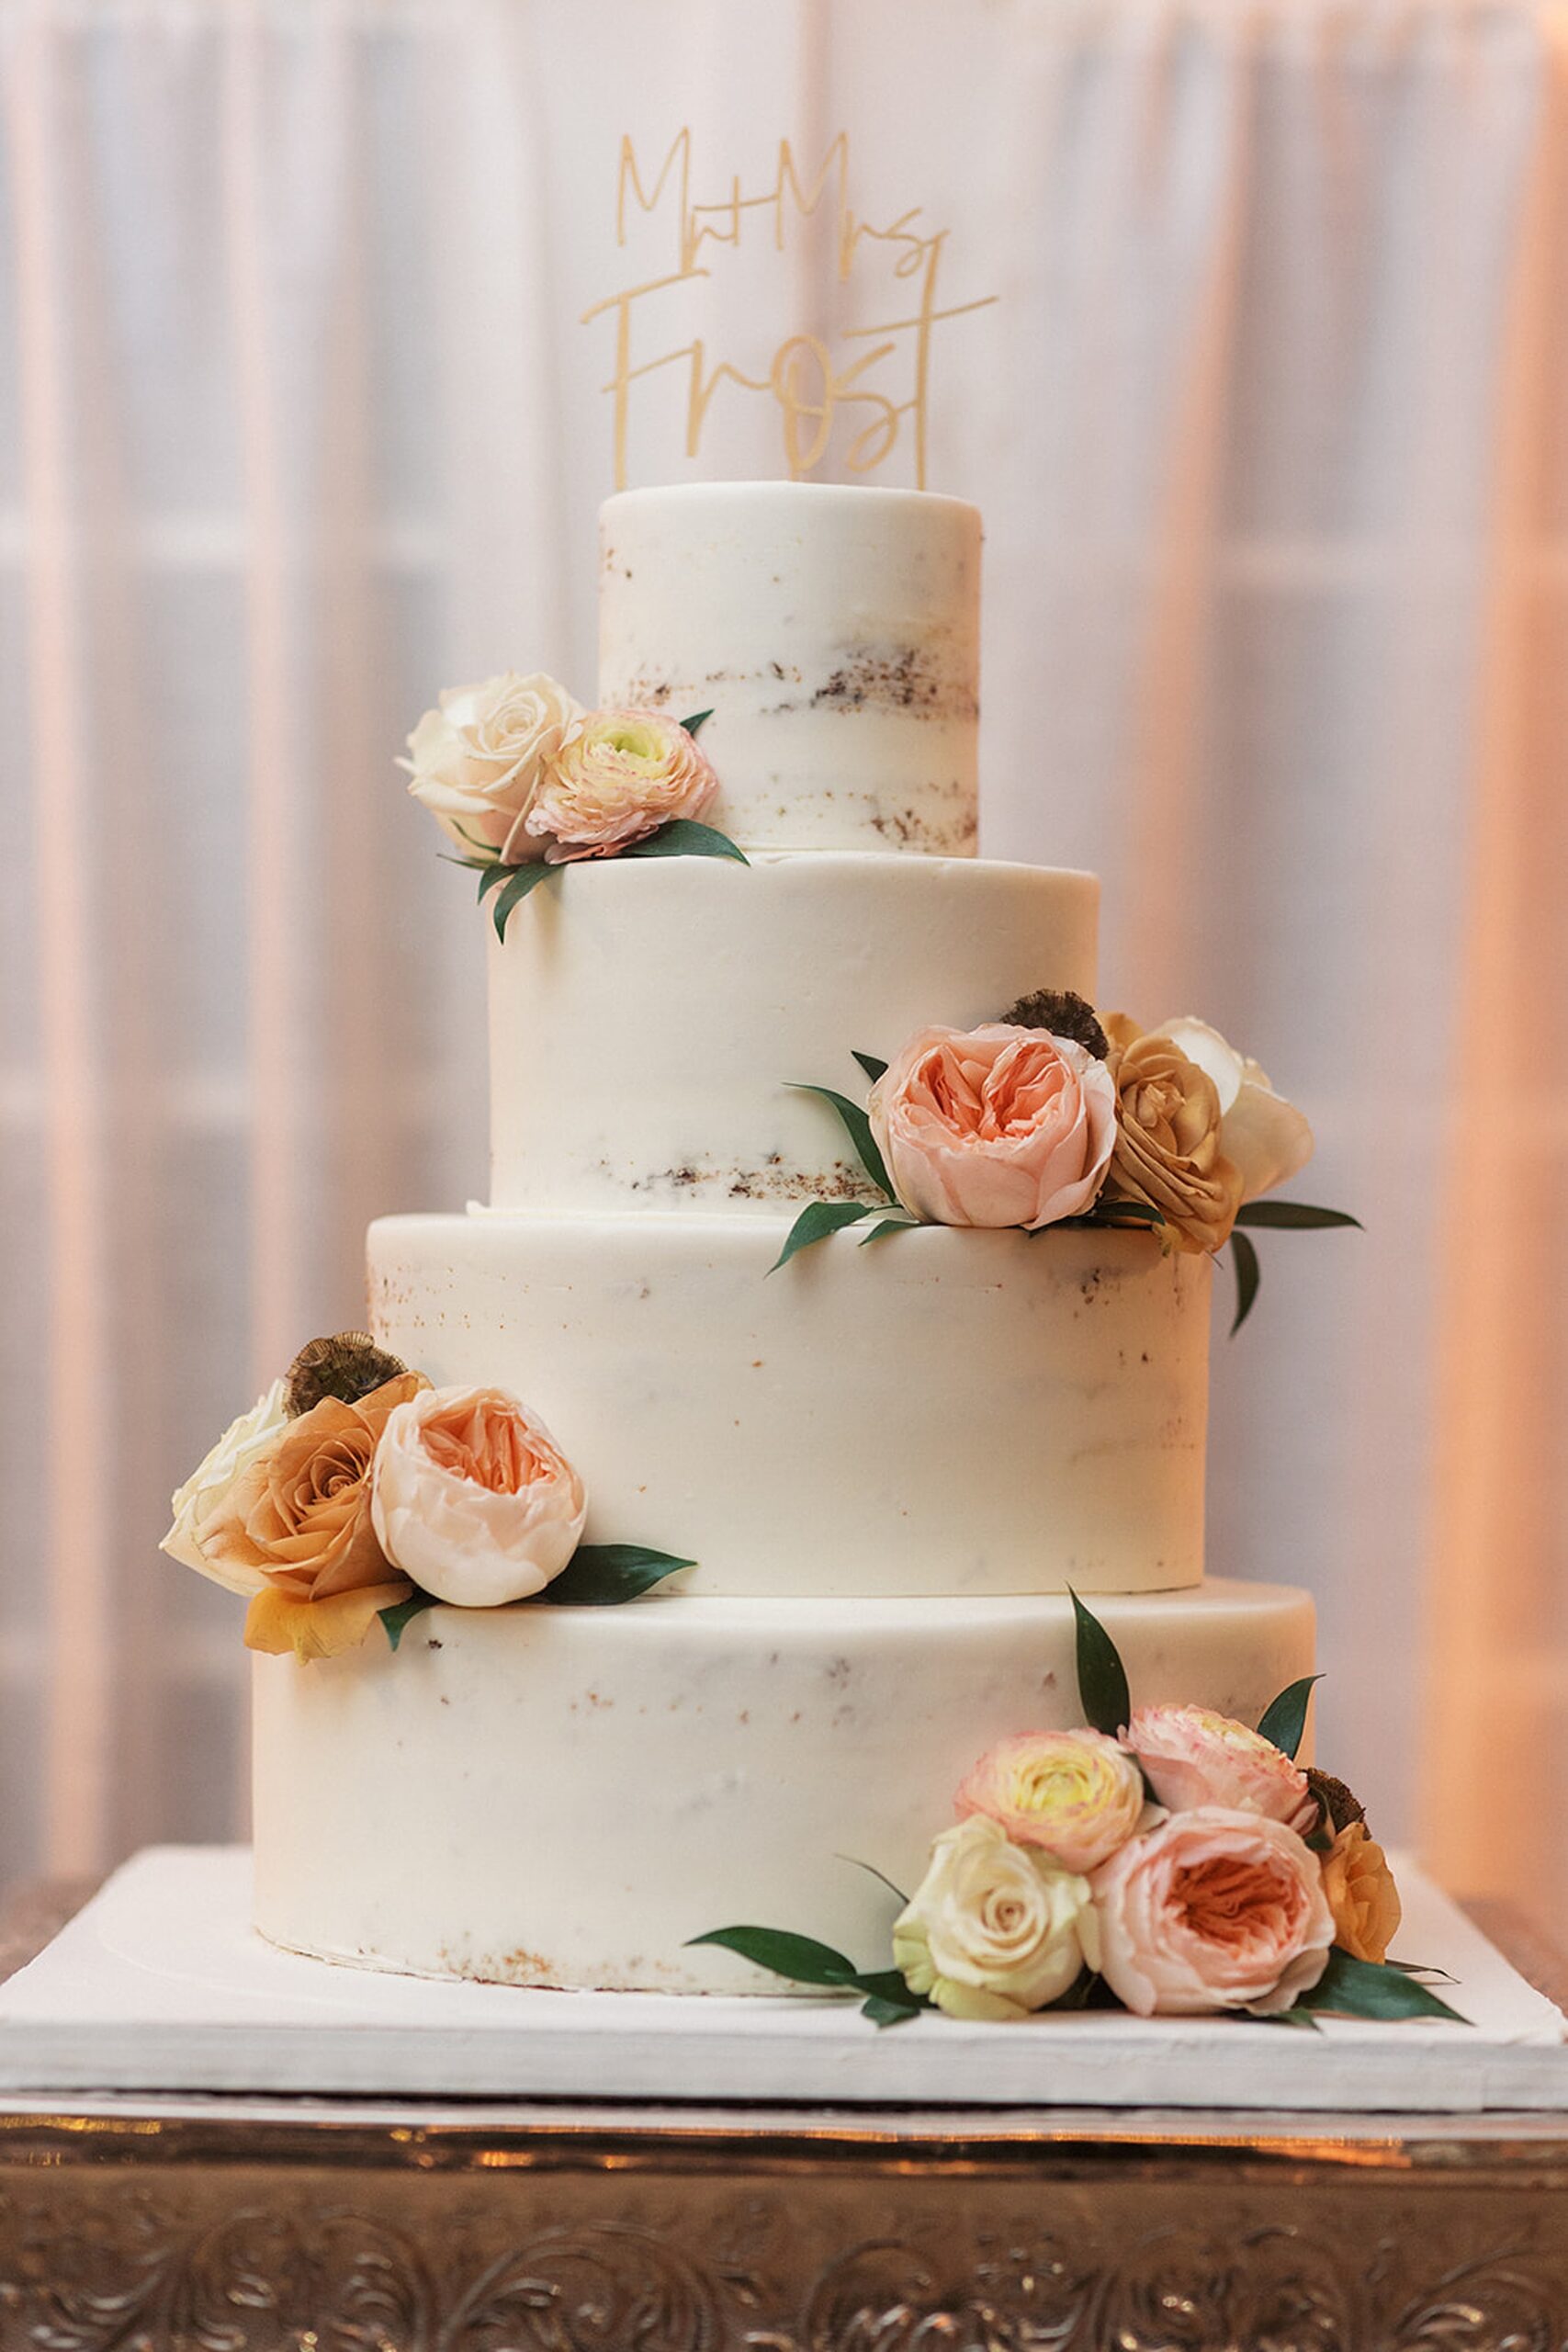 Details of a four tier wedding cake decorated with flowers